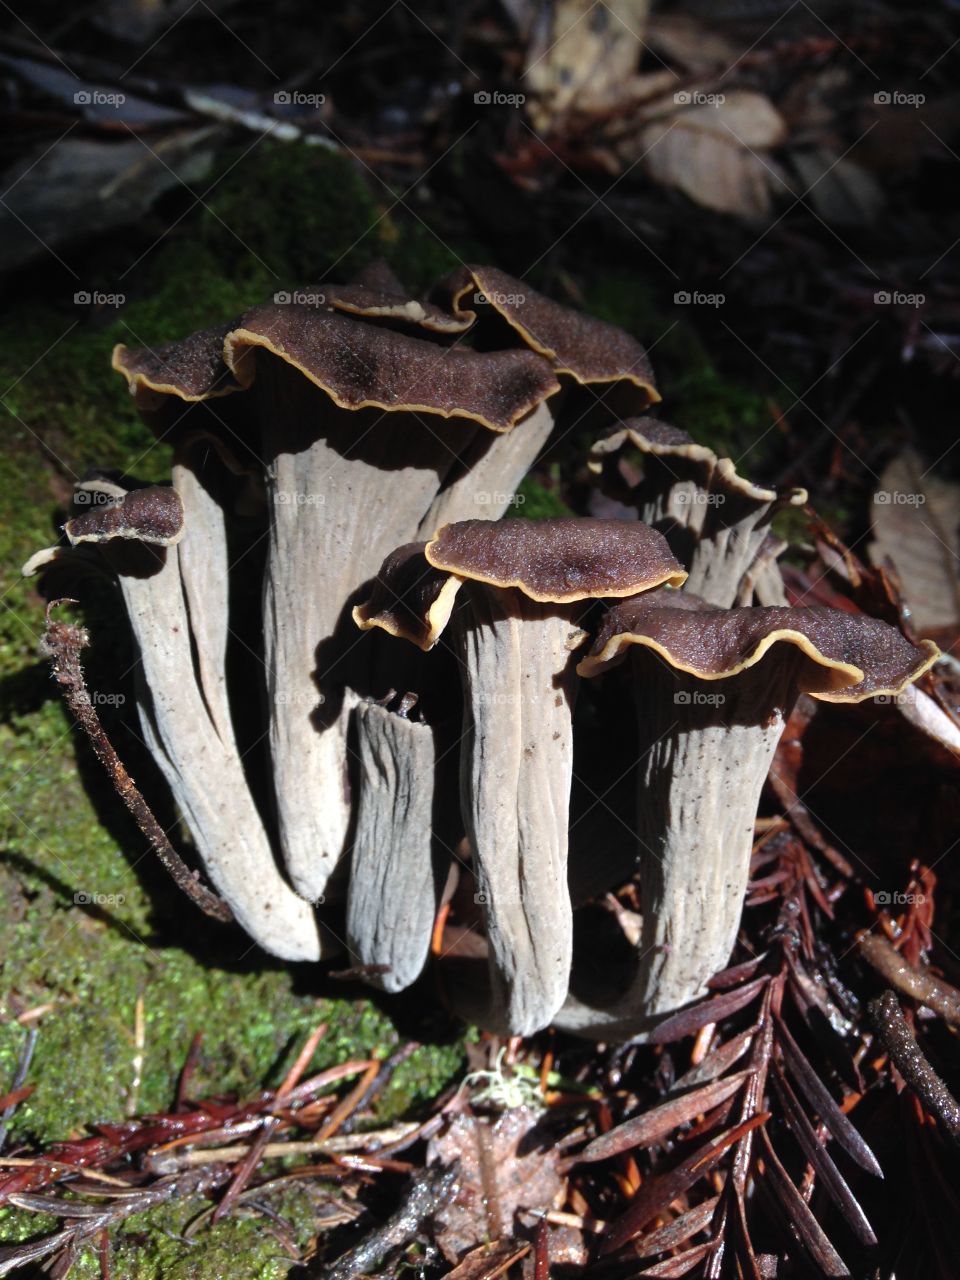 Black Trumpets . Black trumpet mushrooms in the woods of the Pacific Northwest 